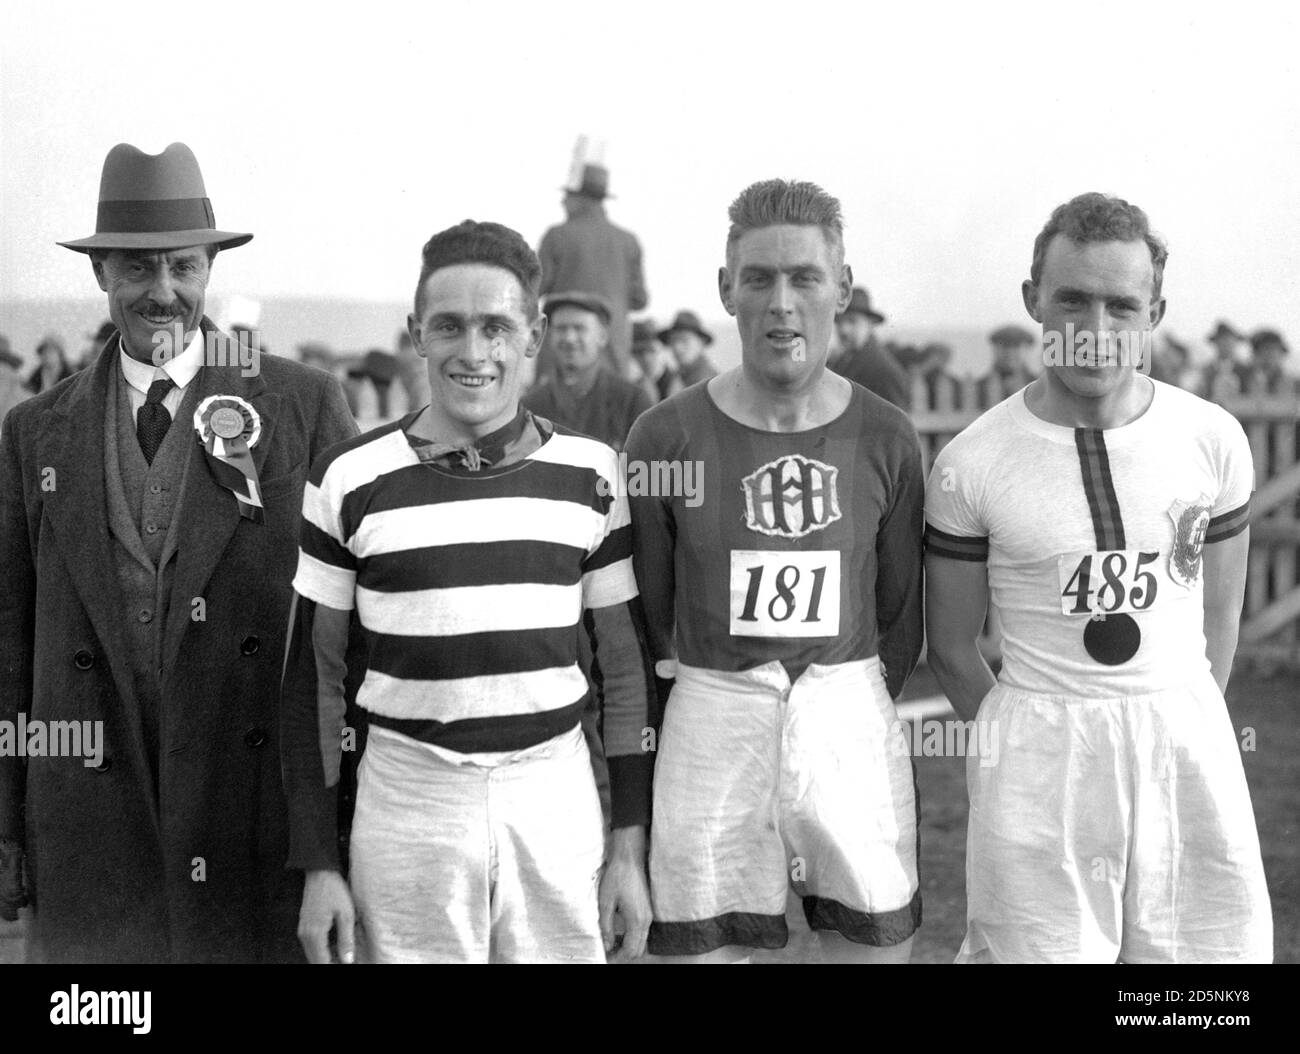 The first, second and third place finishers of the Southern Counties Ten Mile Cross Country Championship race, which started from the Grandstand of the Brighton Racecourse, (L-R) S.A.Tomlin (winner), of Highgate Harriers, J.A. Broadley (second), of Hampstead Harriers, and B.C.V. Oddie (third), of South London Harriers. Stock Photo